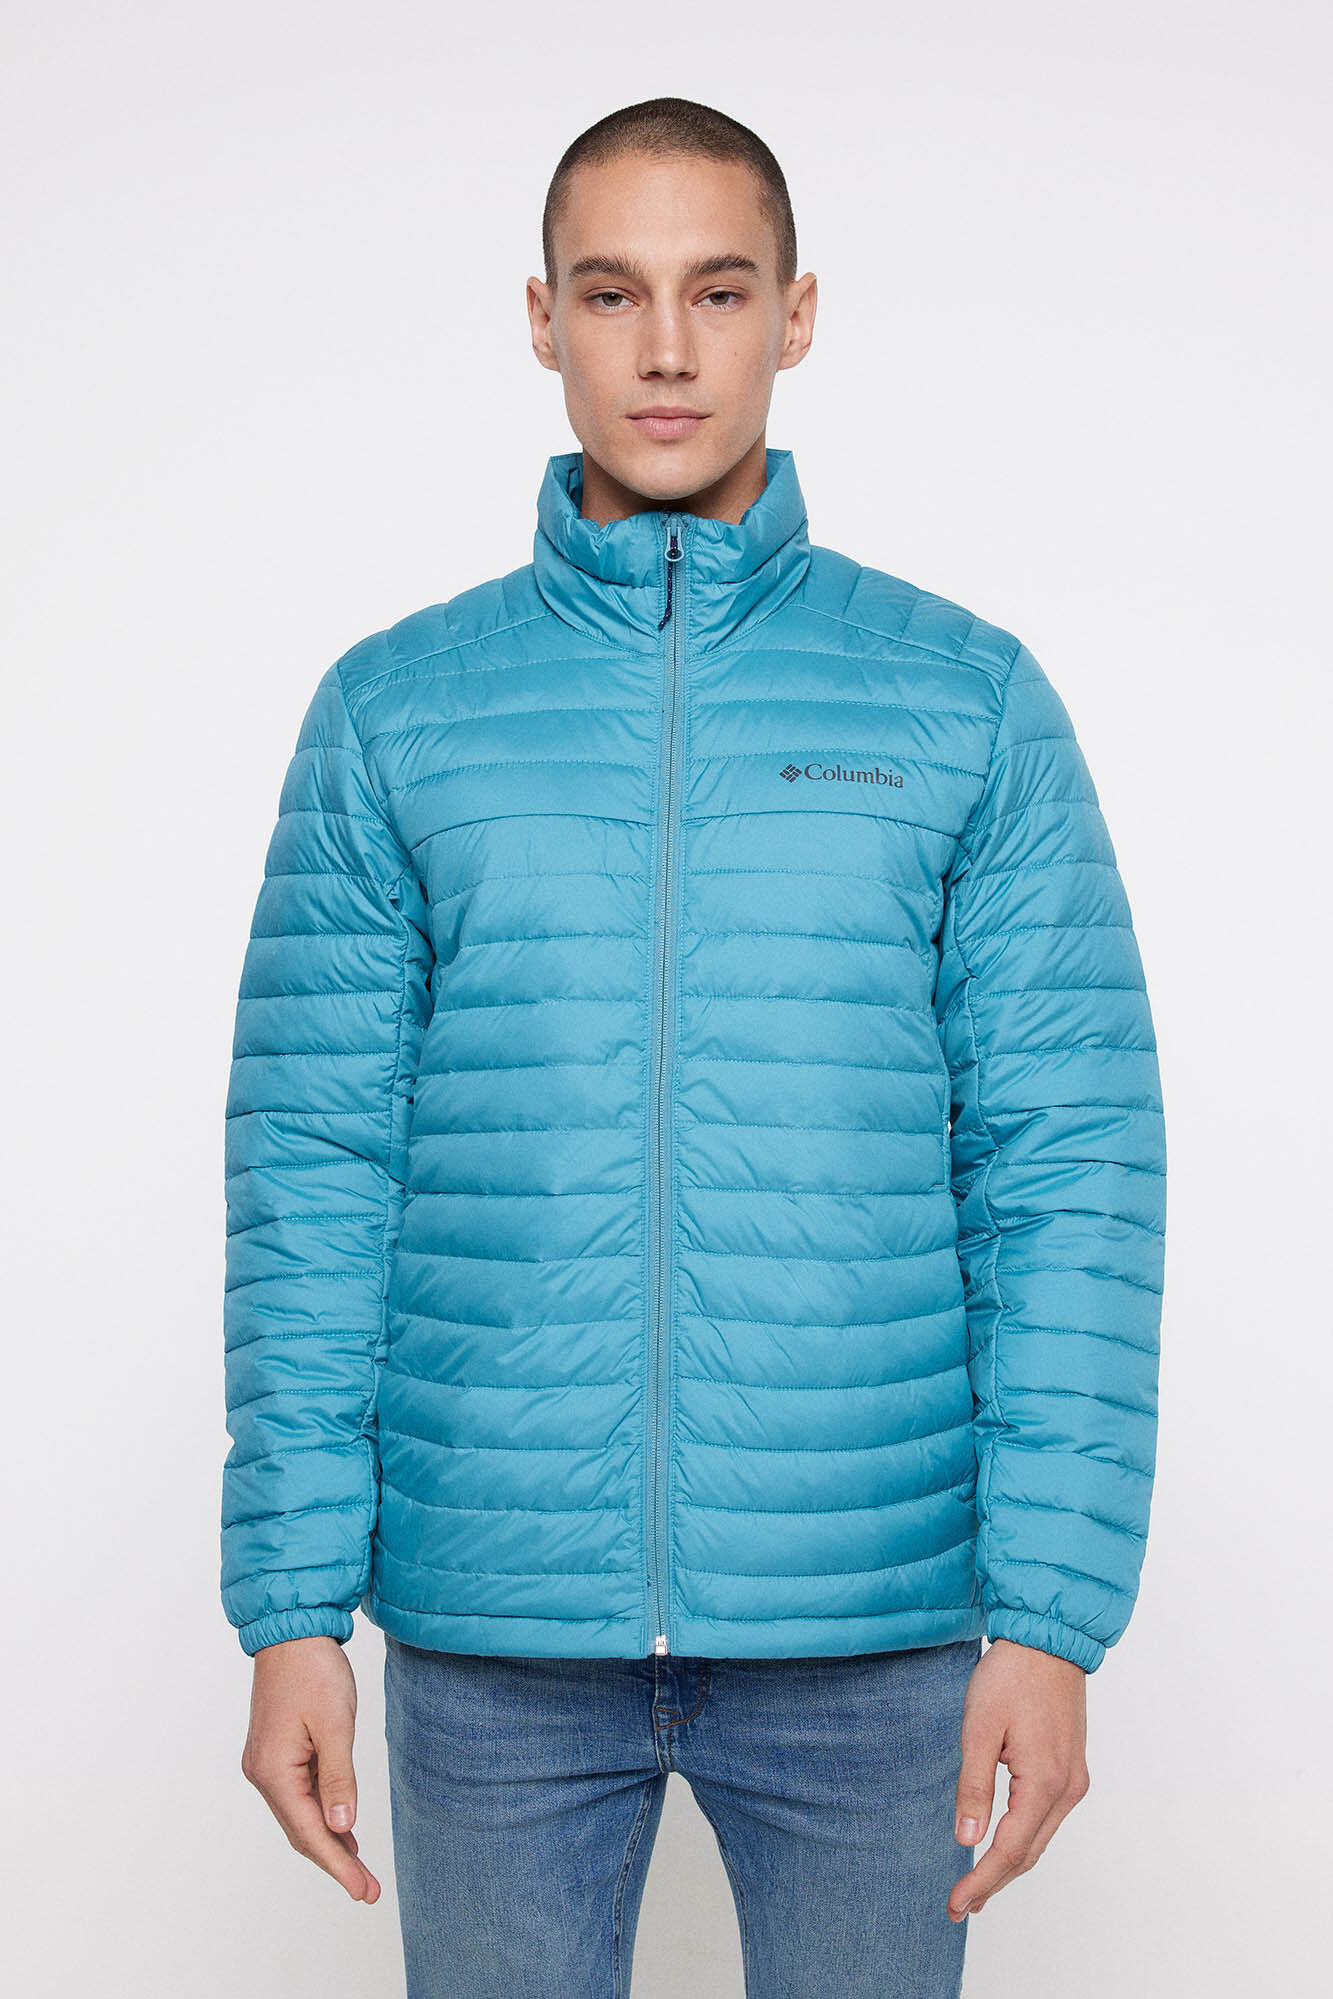 The Columbia Powder Lite Insulated Jacket Is Now 30% Off - Men's Journal